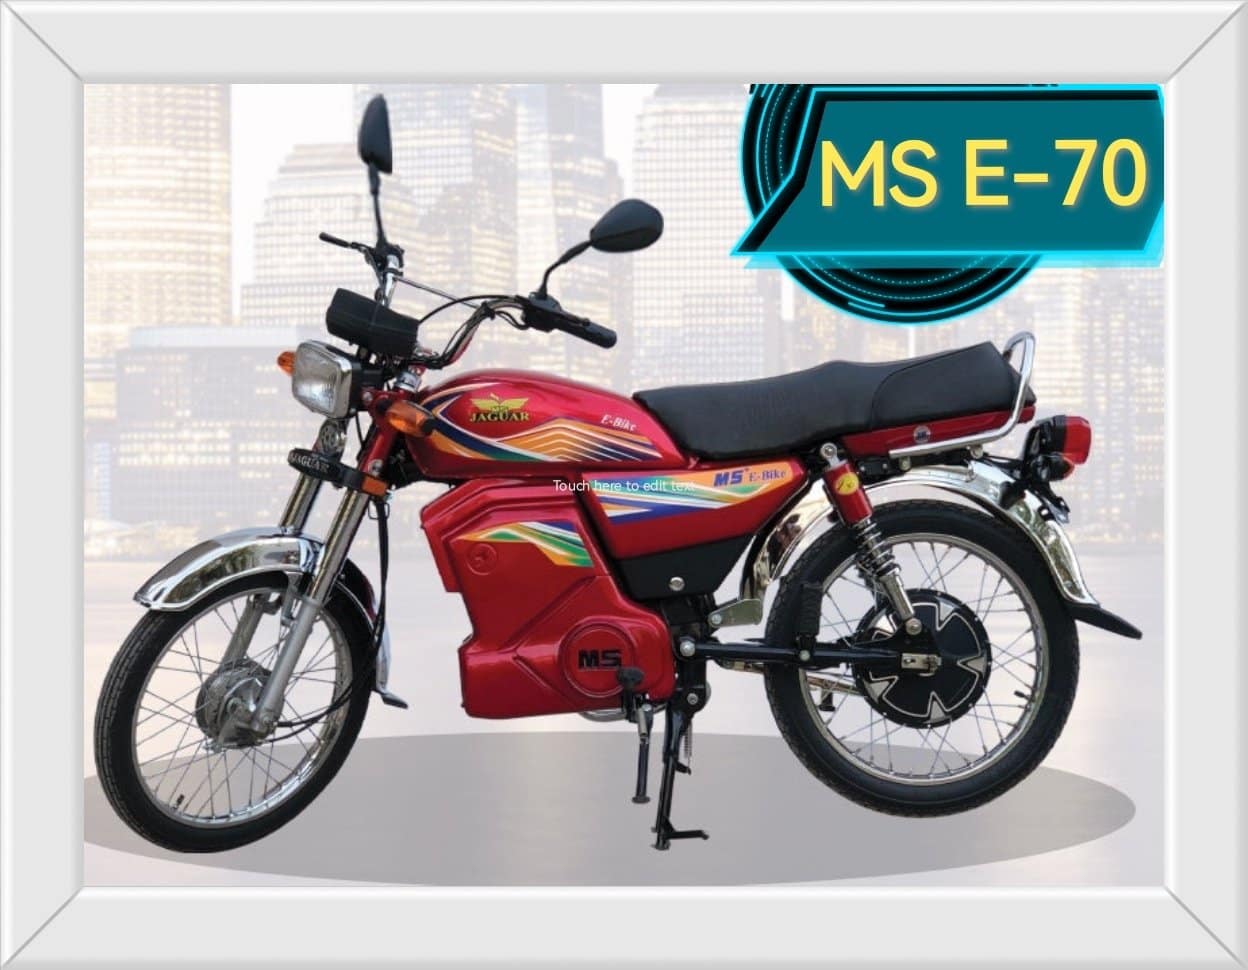 A red motorcycle in a showroom

Description automatically generated with medium confidence